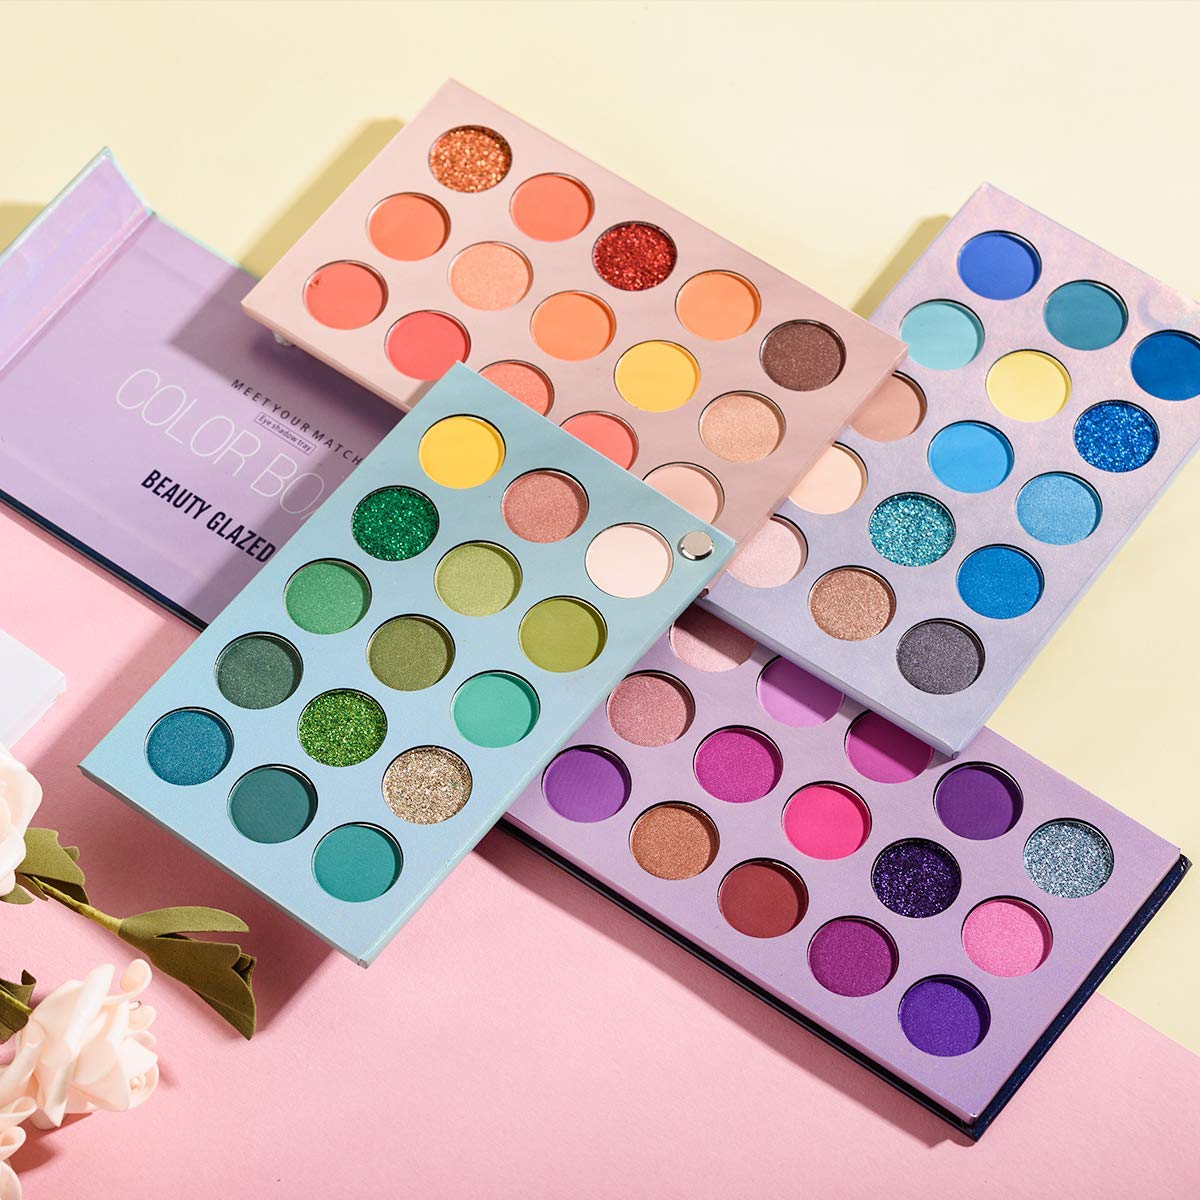  MYUANGO 60 Shades Color Board Eyeshadow Palette Shimmer Matte and Glitter Eye Shadow Soft Creamy Texture Waterproof Blendable Long Lasting Eye Makeup Palette